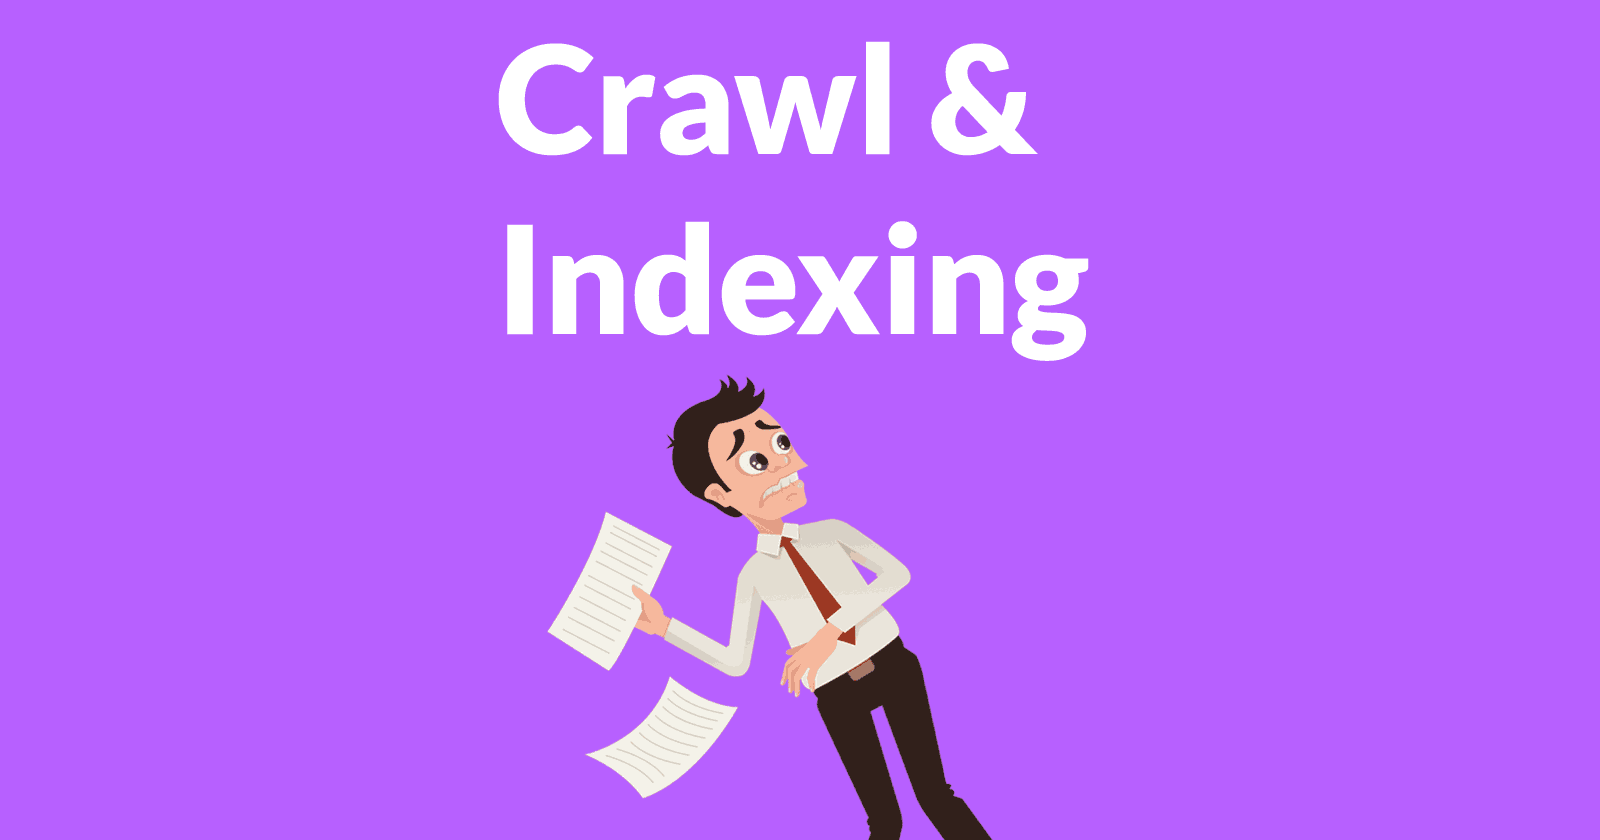 Google Crawl and Indexing Update March 1, 2020 - Search Engine Journal